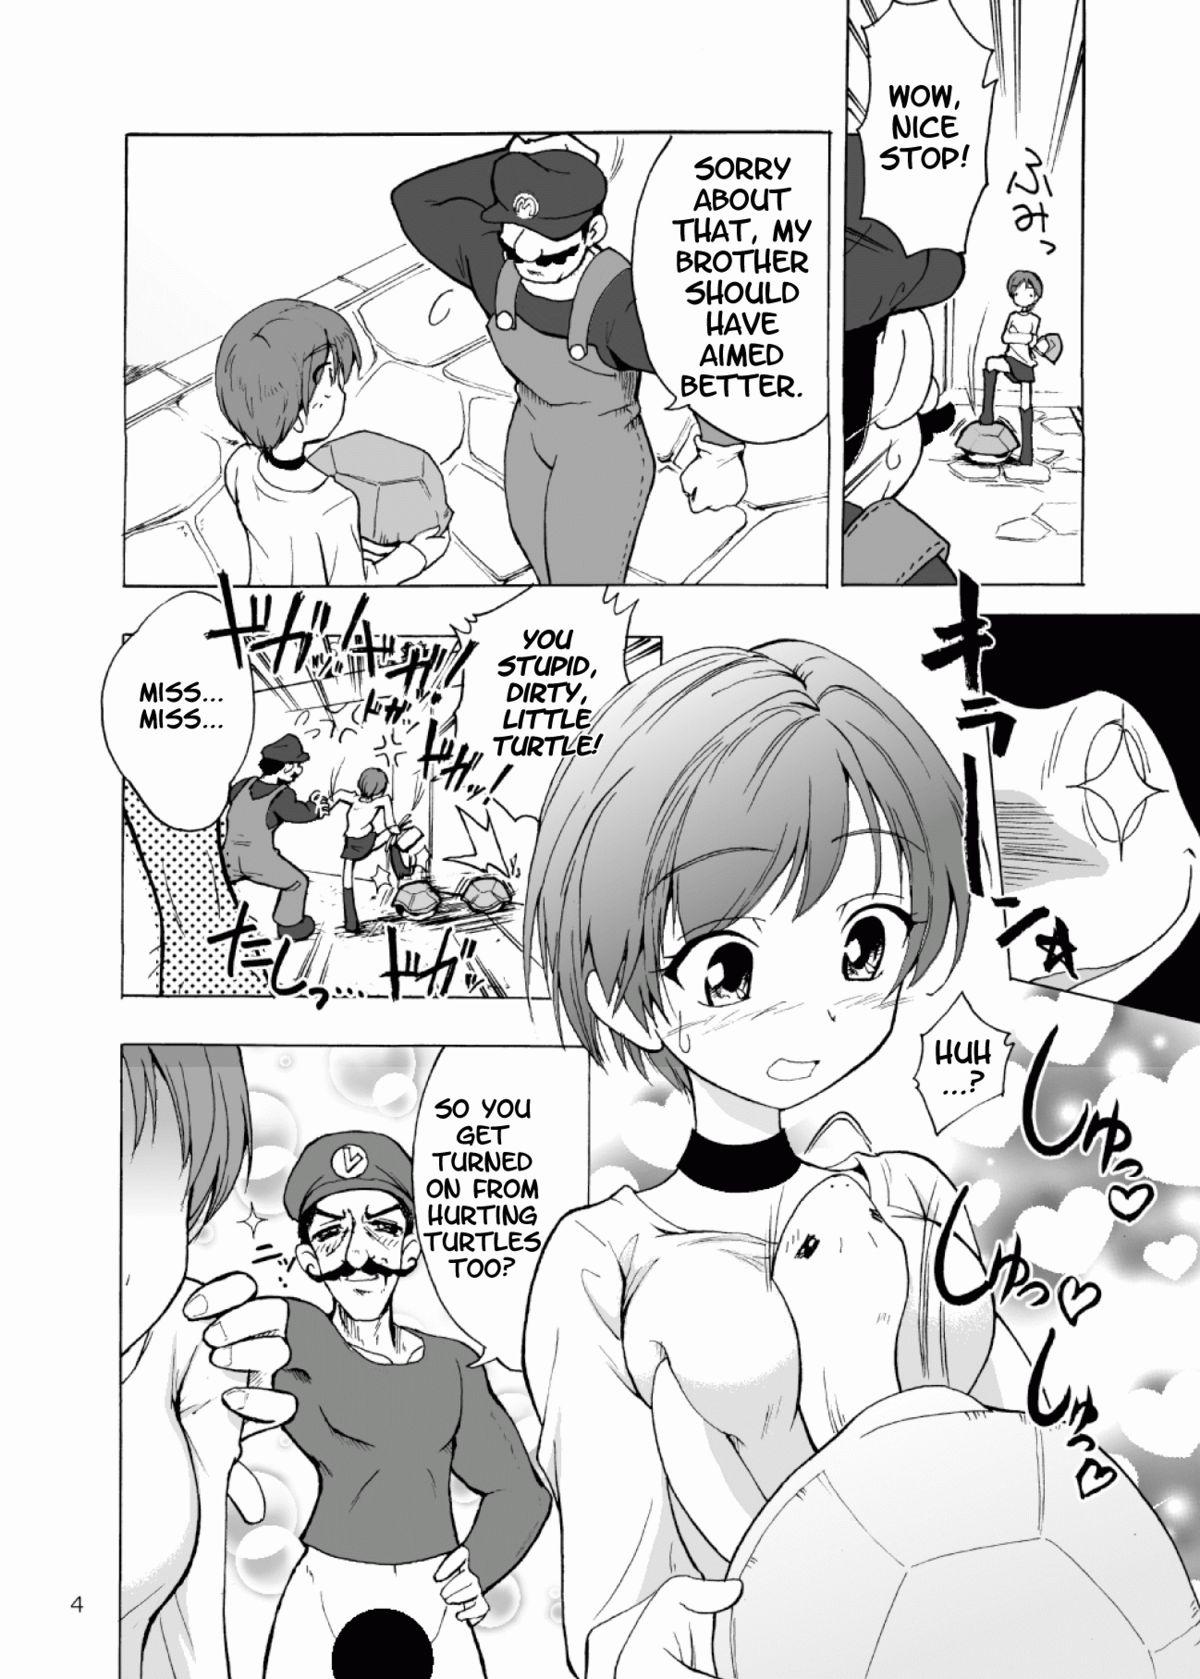 Bigcock Rebecca x 99 - Resident evil Highschool - Page 5